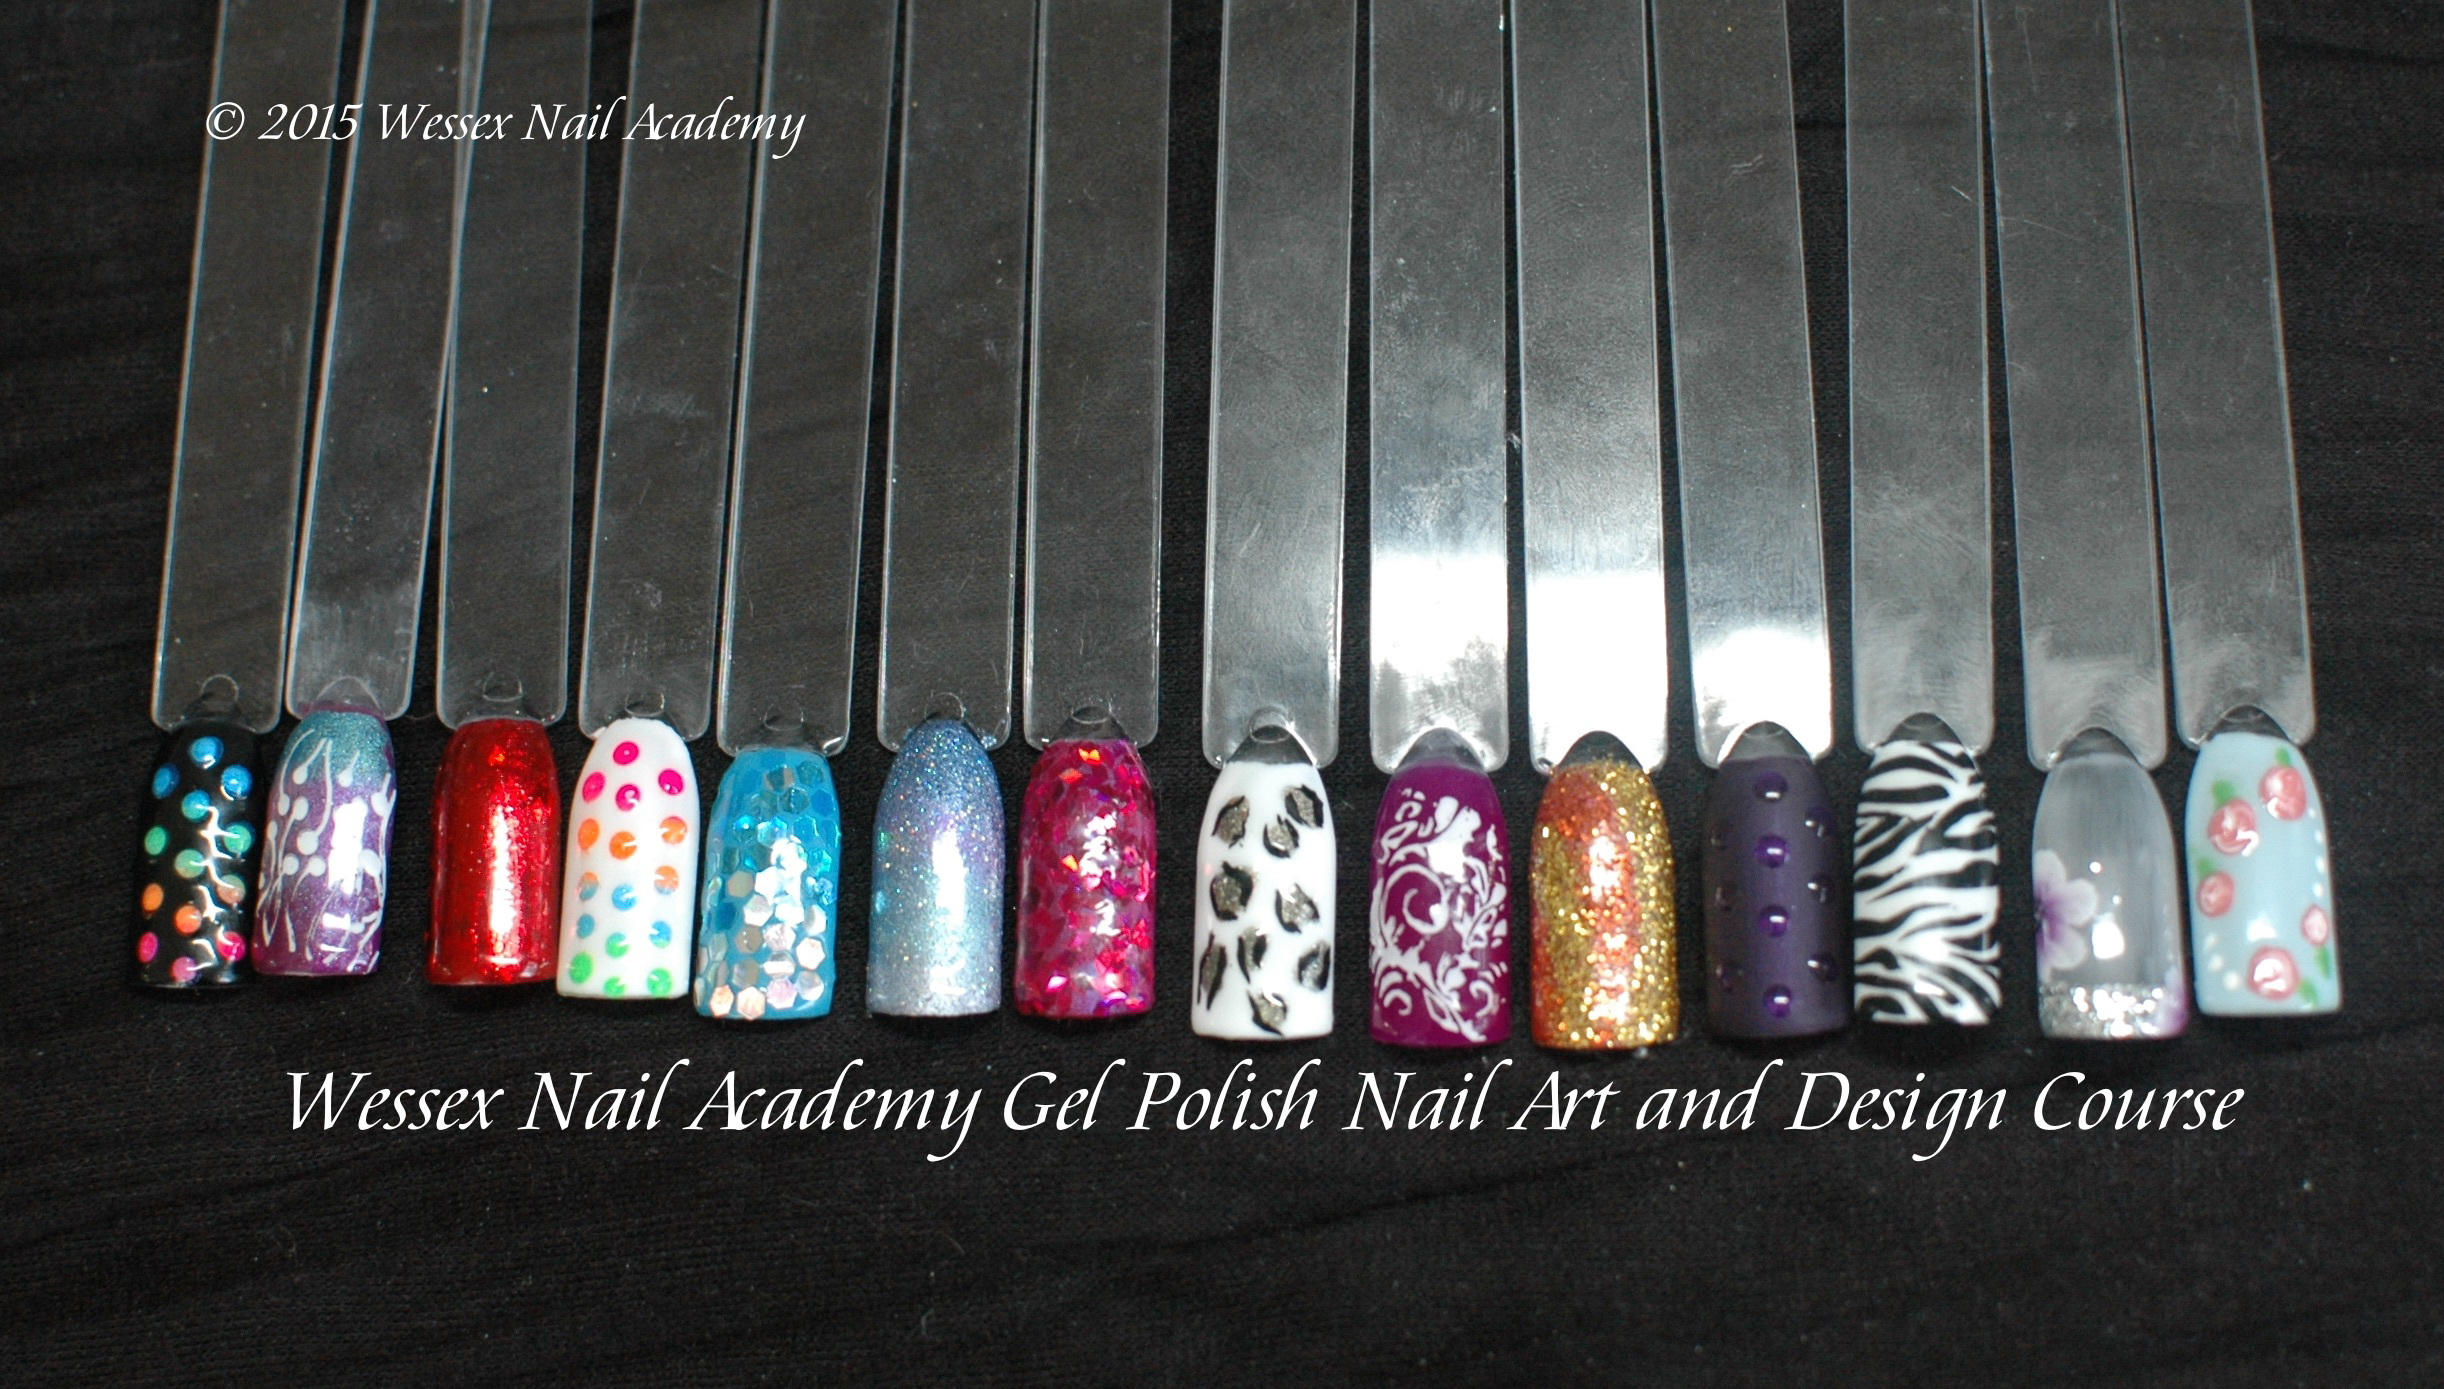 Nail Art Course Students Work, Nail extension training, nail training course, Wessex Nail Academy Okeford Fitzpaine, Dorset